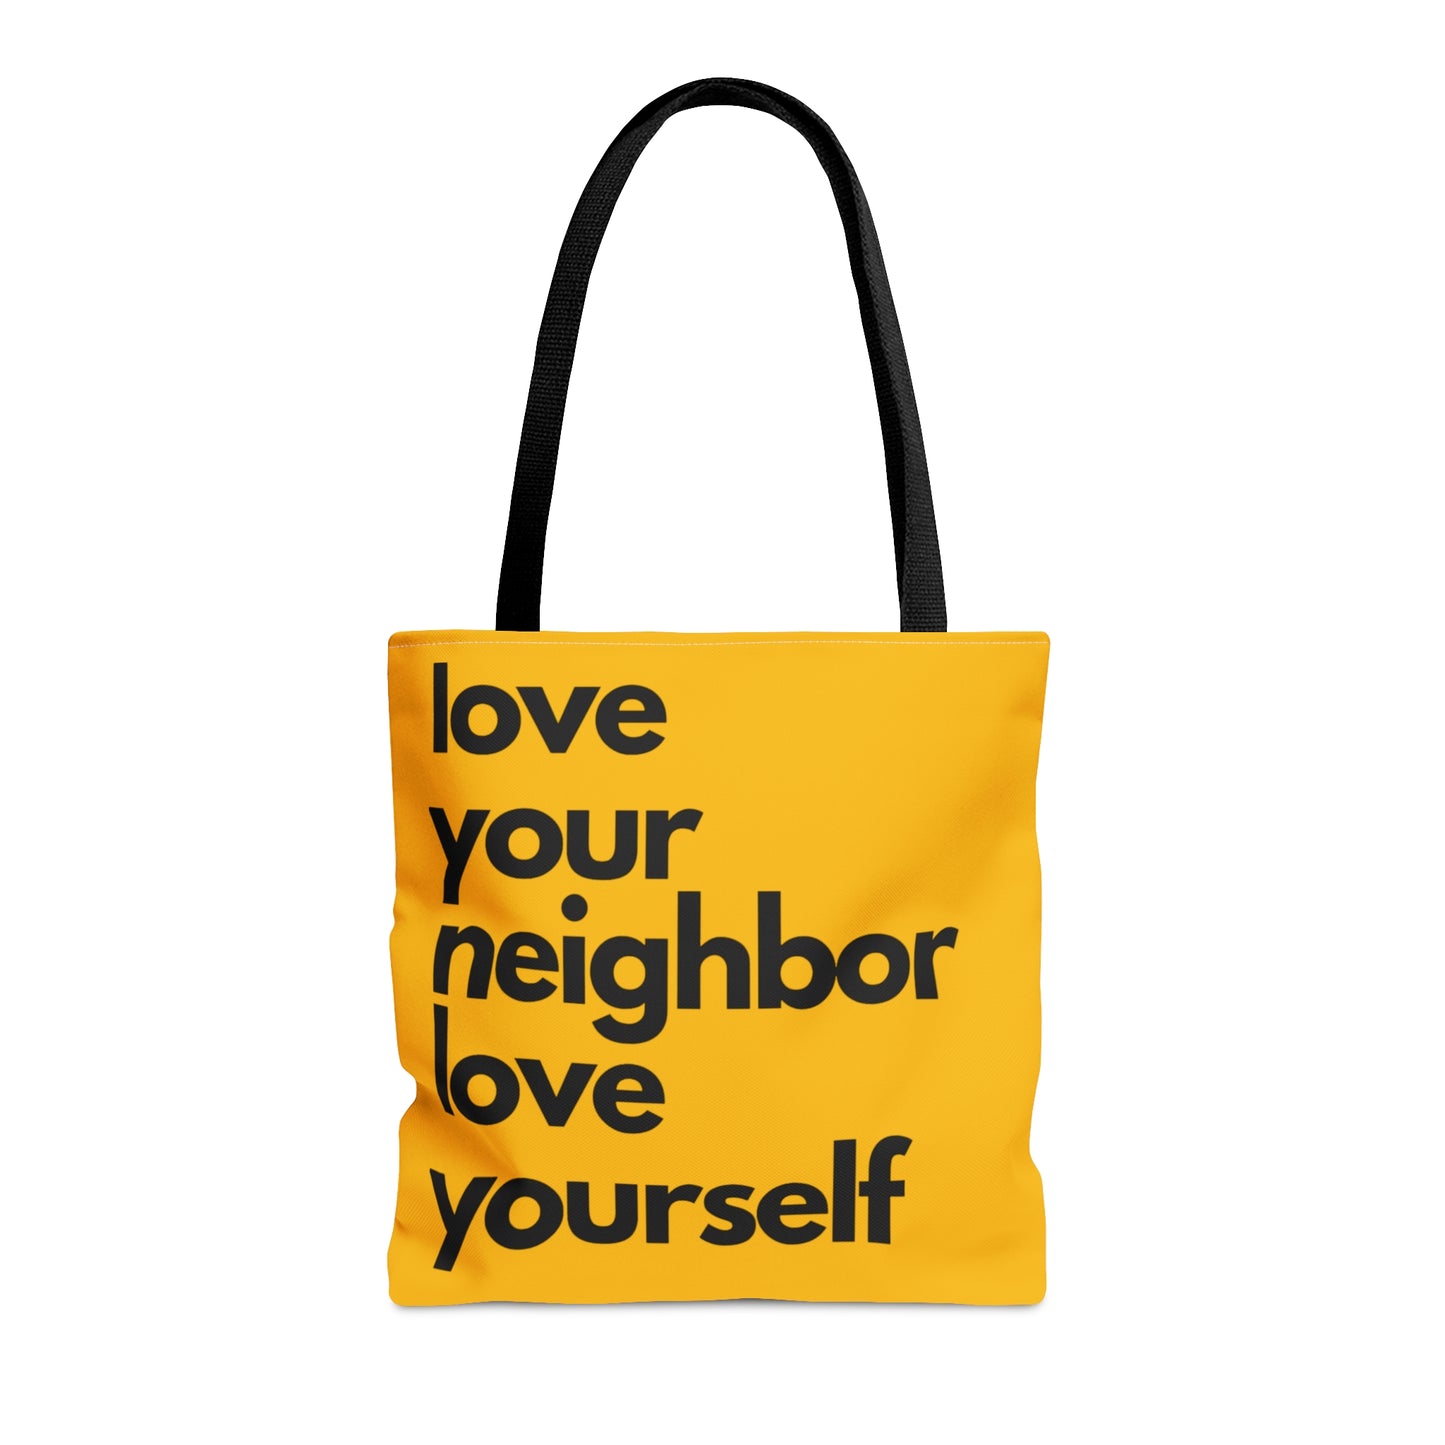 Inspiring and powerful message of love on both sides of this tote bag. Come in 3 sizes to meet your needs.